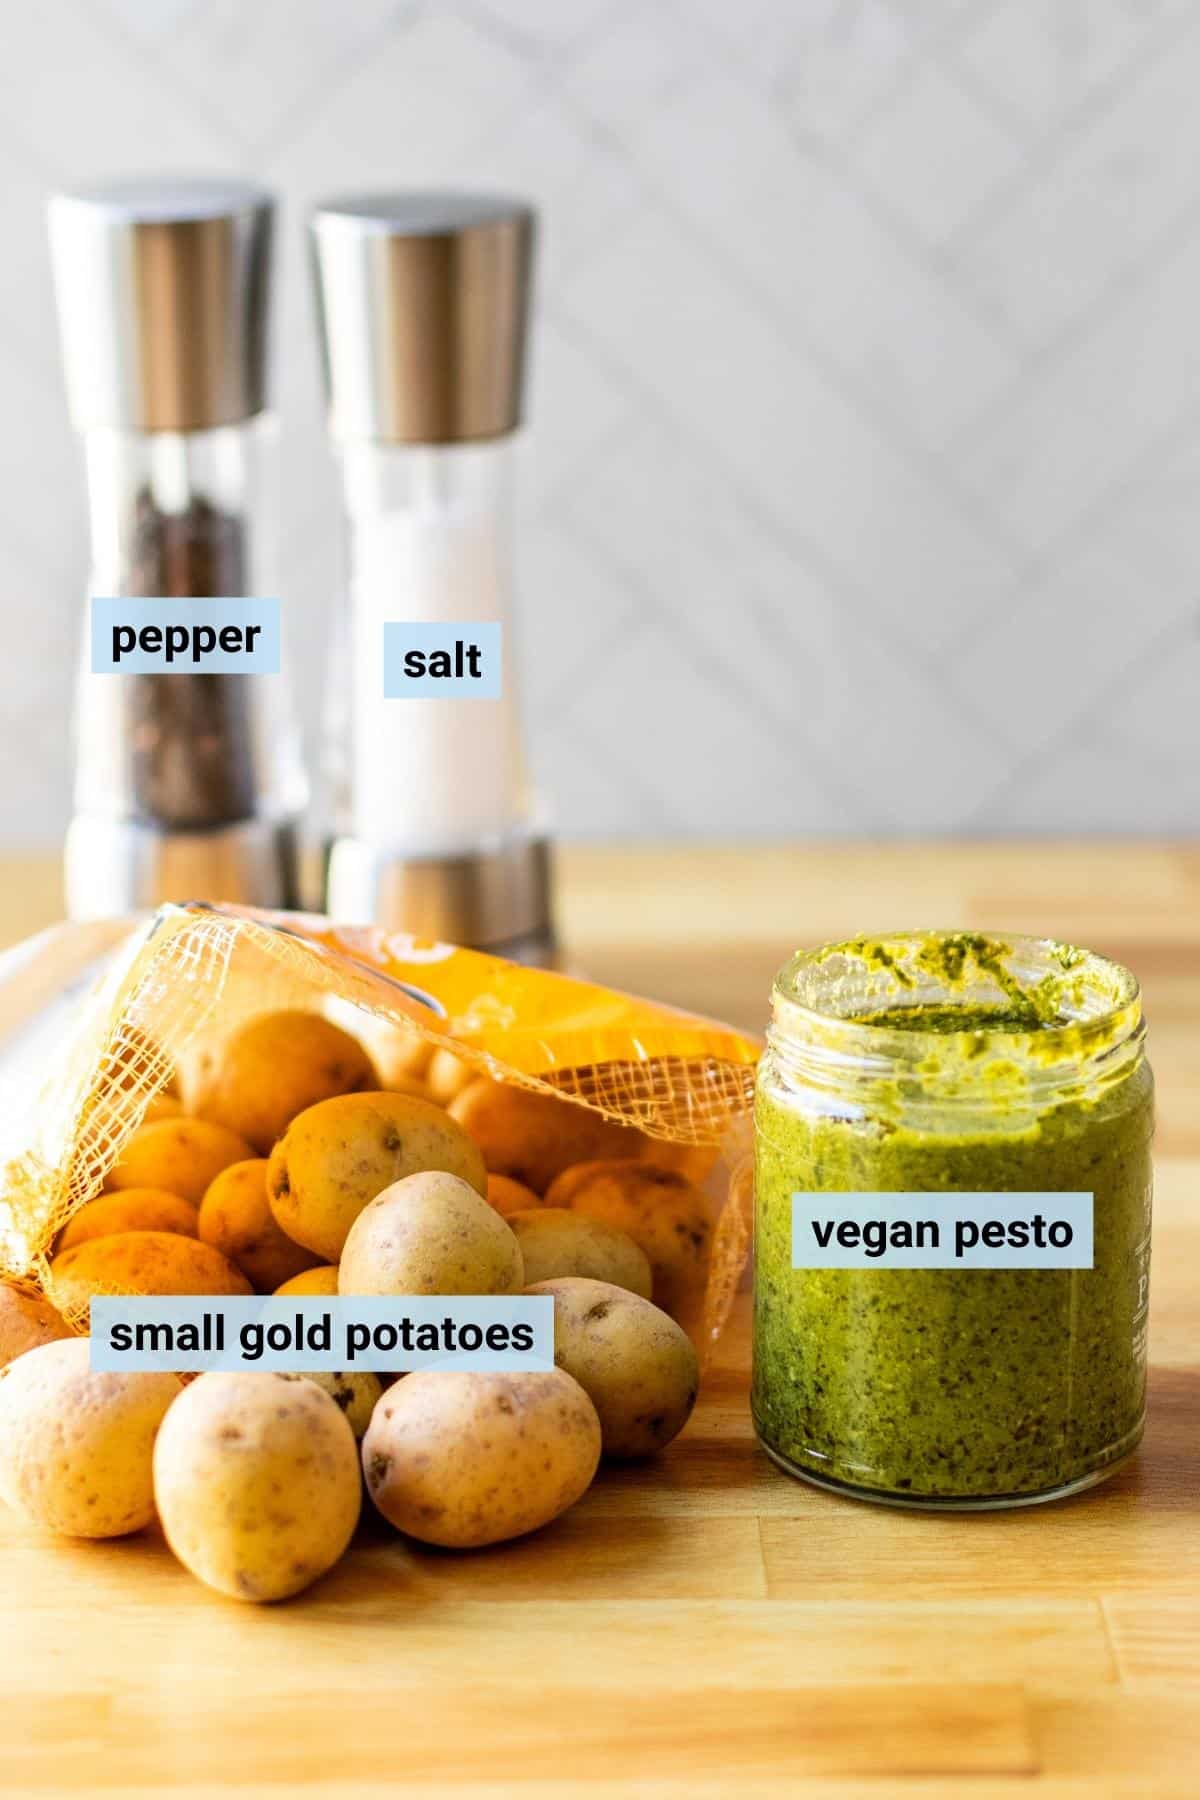 Bag of small gold potatoes, jar of vegan pesto, and salt and pepper grinders on a cutting board.